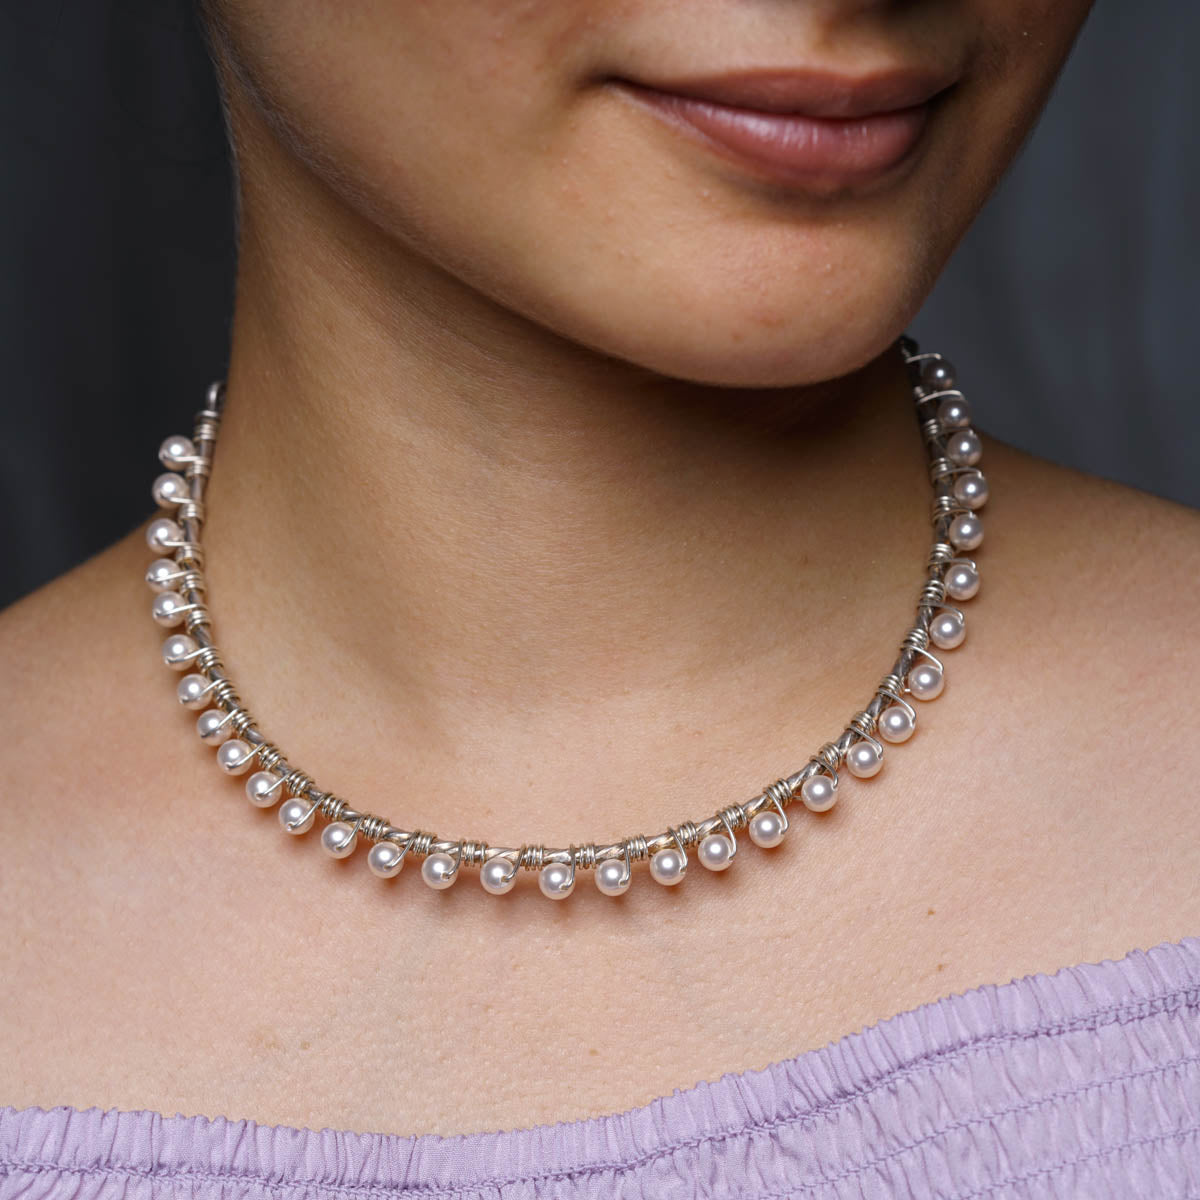 Halo, faux pearl collar necklace – One Vintage